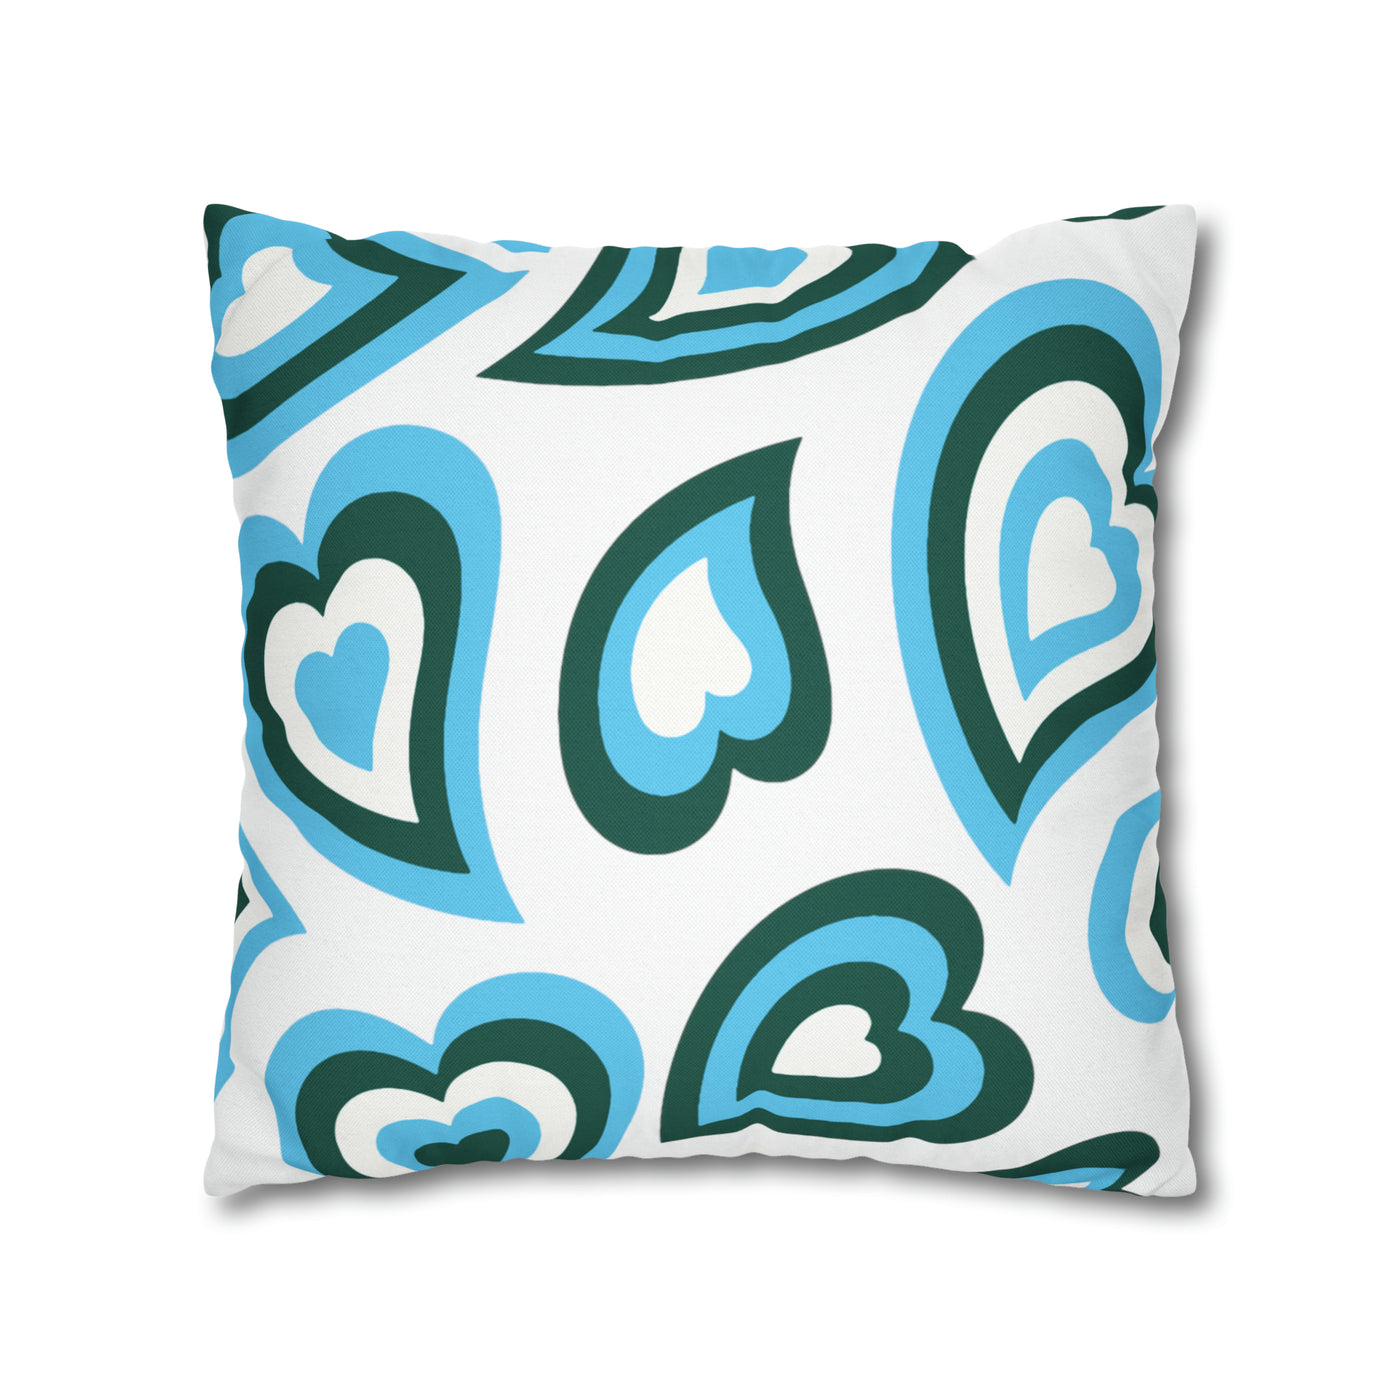 Copy of Retro Heart Pillow - Blue and Green, Heart Pillow, Hearts, Valentine's Day, Tulane, Roll Wave, Bed Party Pillow, Camp, dorm decor